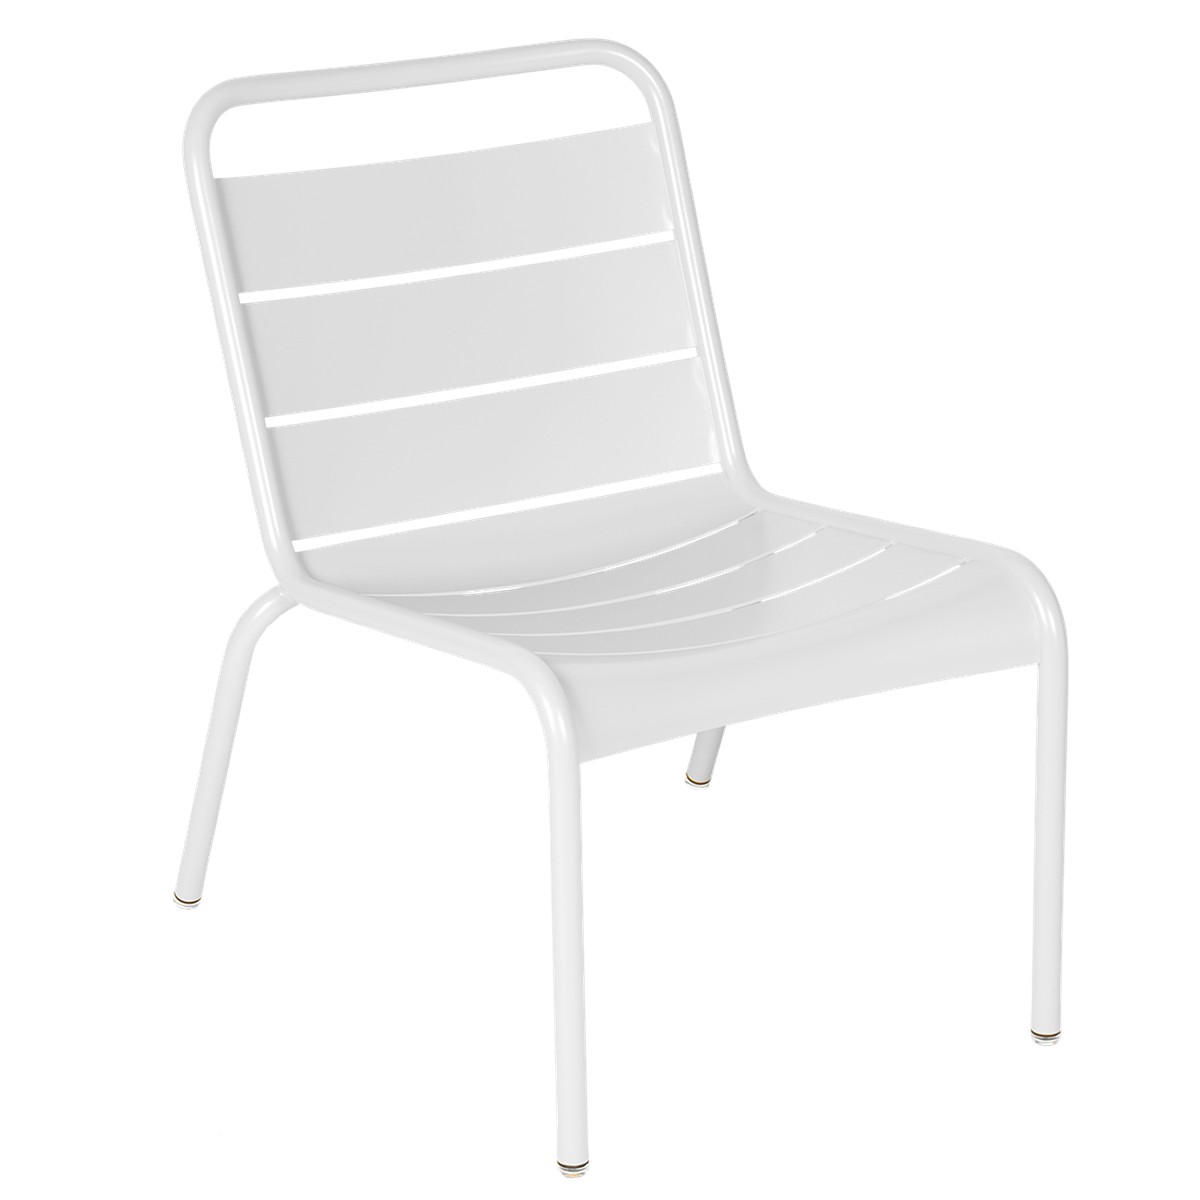 Fermob Luxembourg Chaise Lounge Luxembourg Blanc L 72.8 x l 58 x H73.9cm